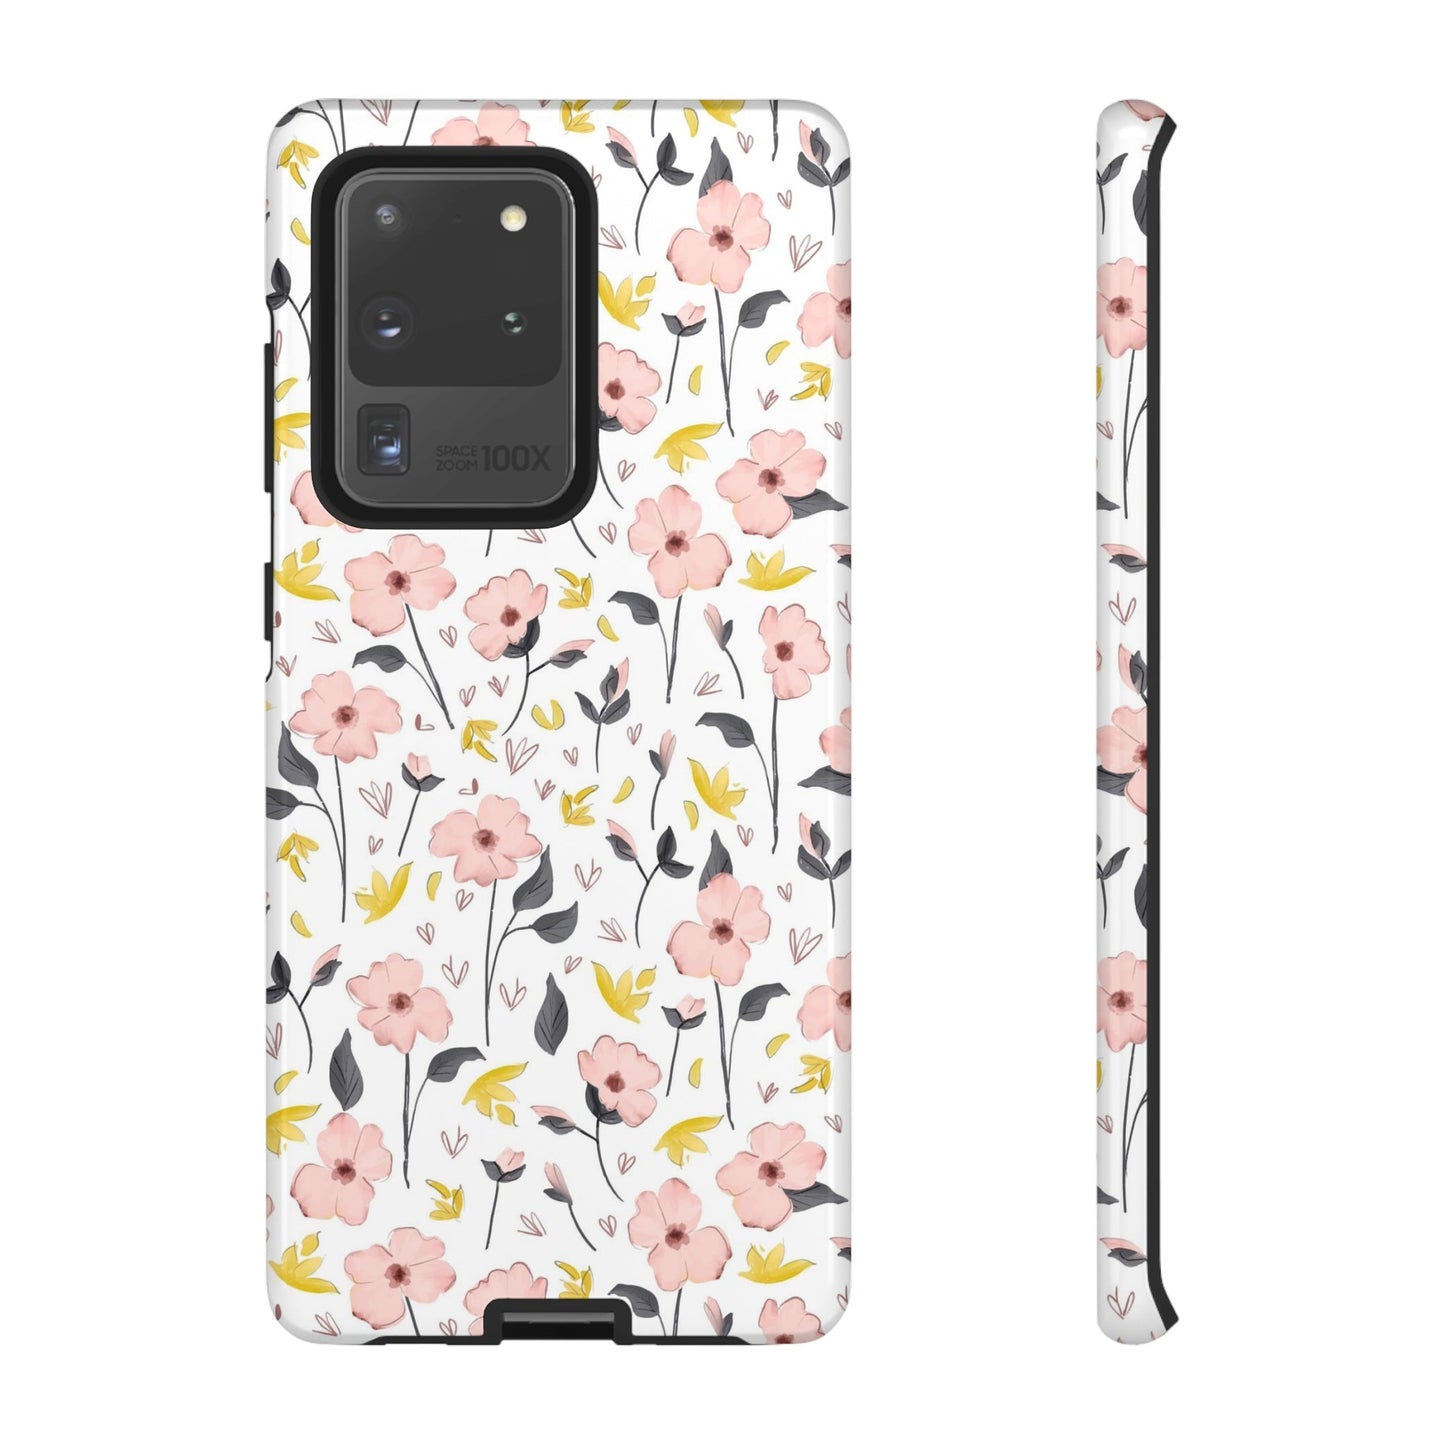 Cute Phone case for Girl fits iPhone Samsung Galaxy Google Pixel - Cheerful Lane